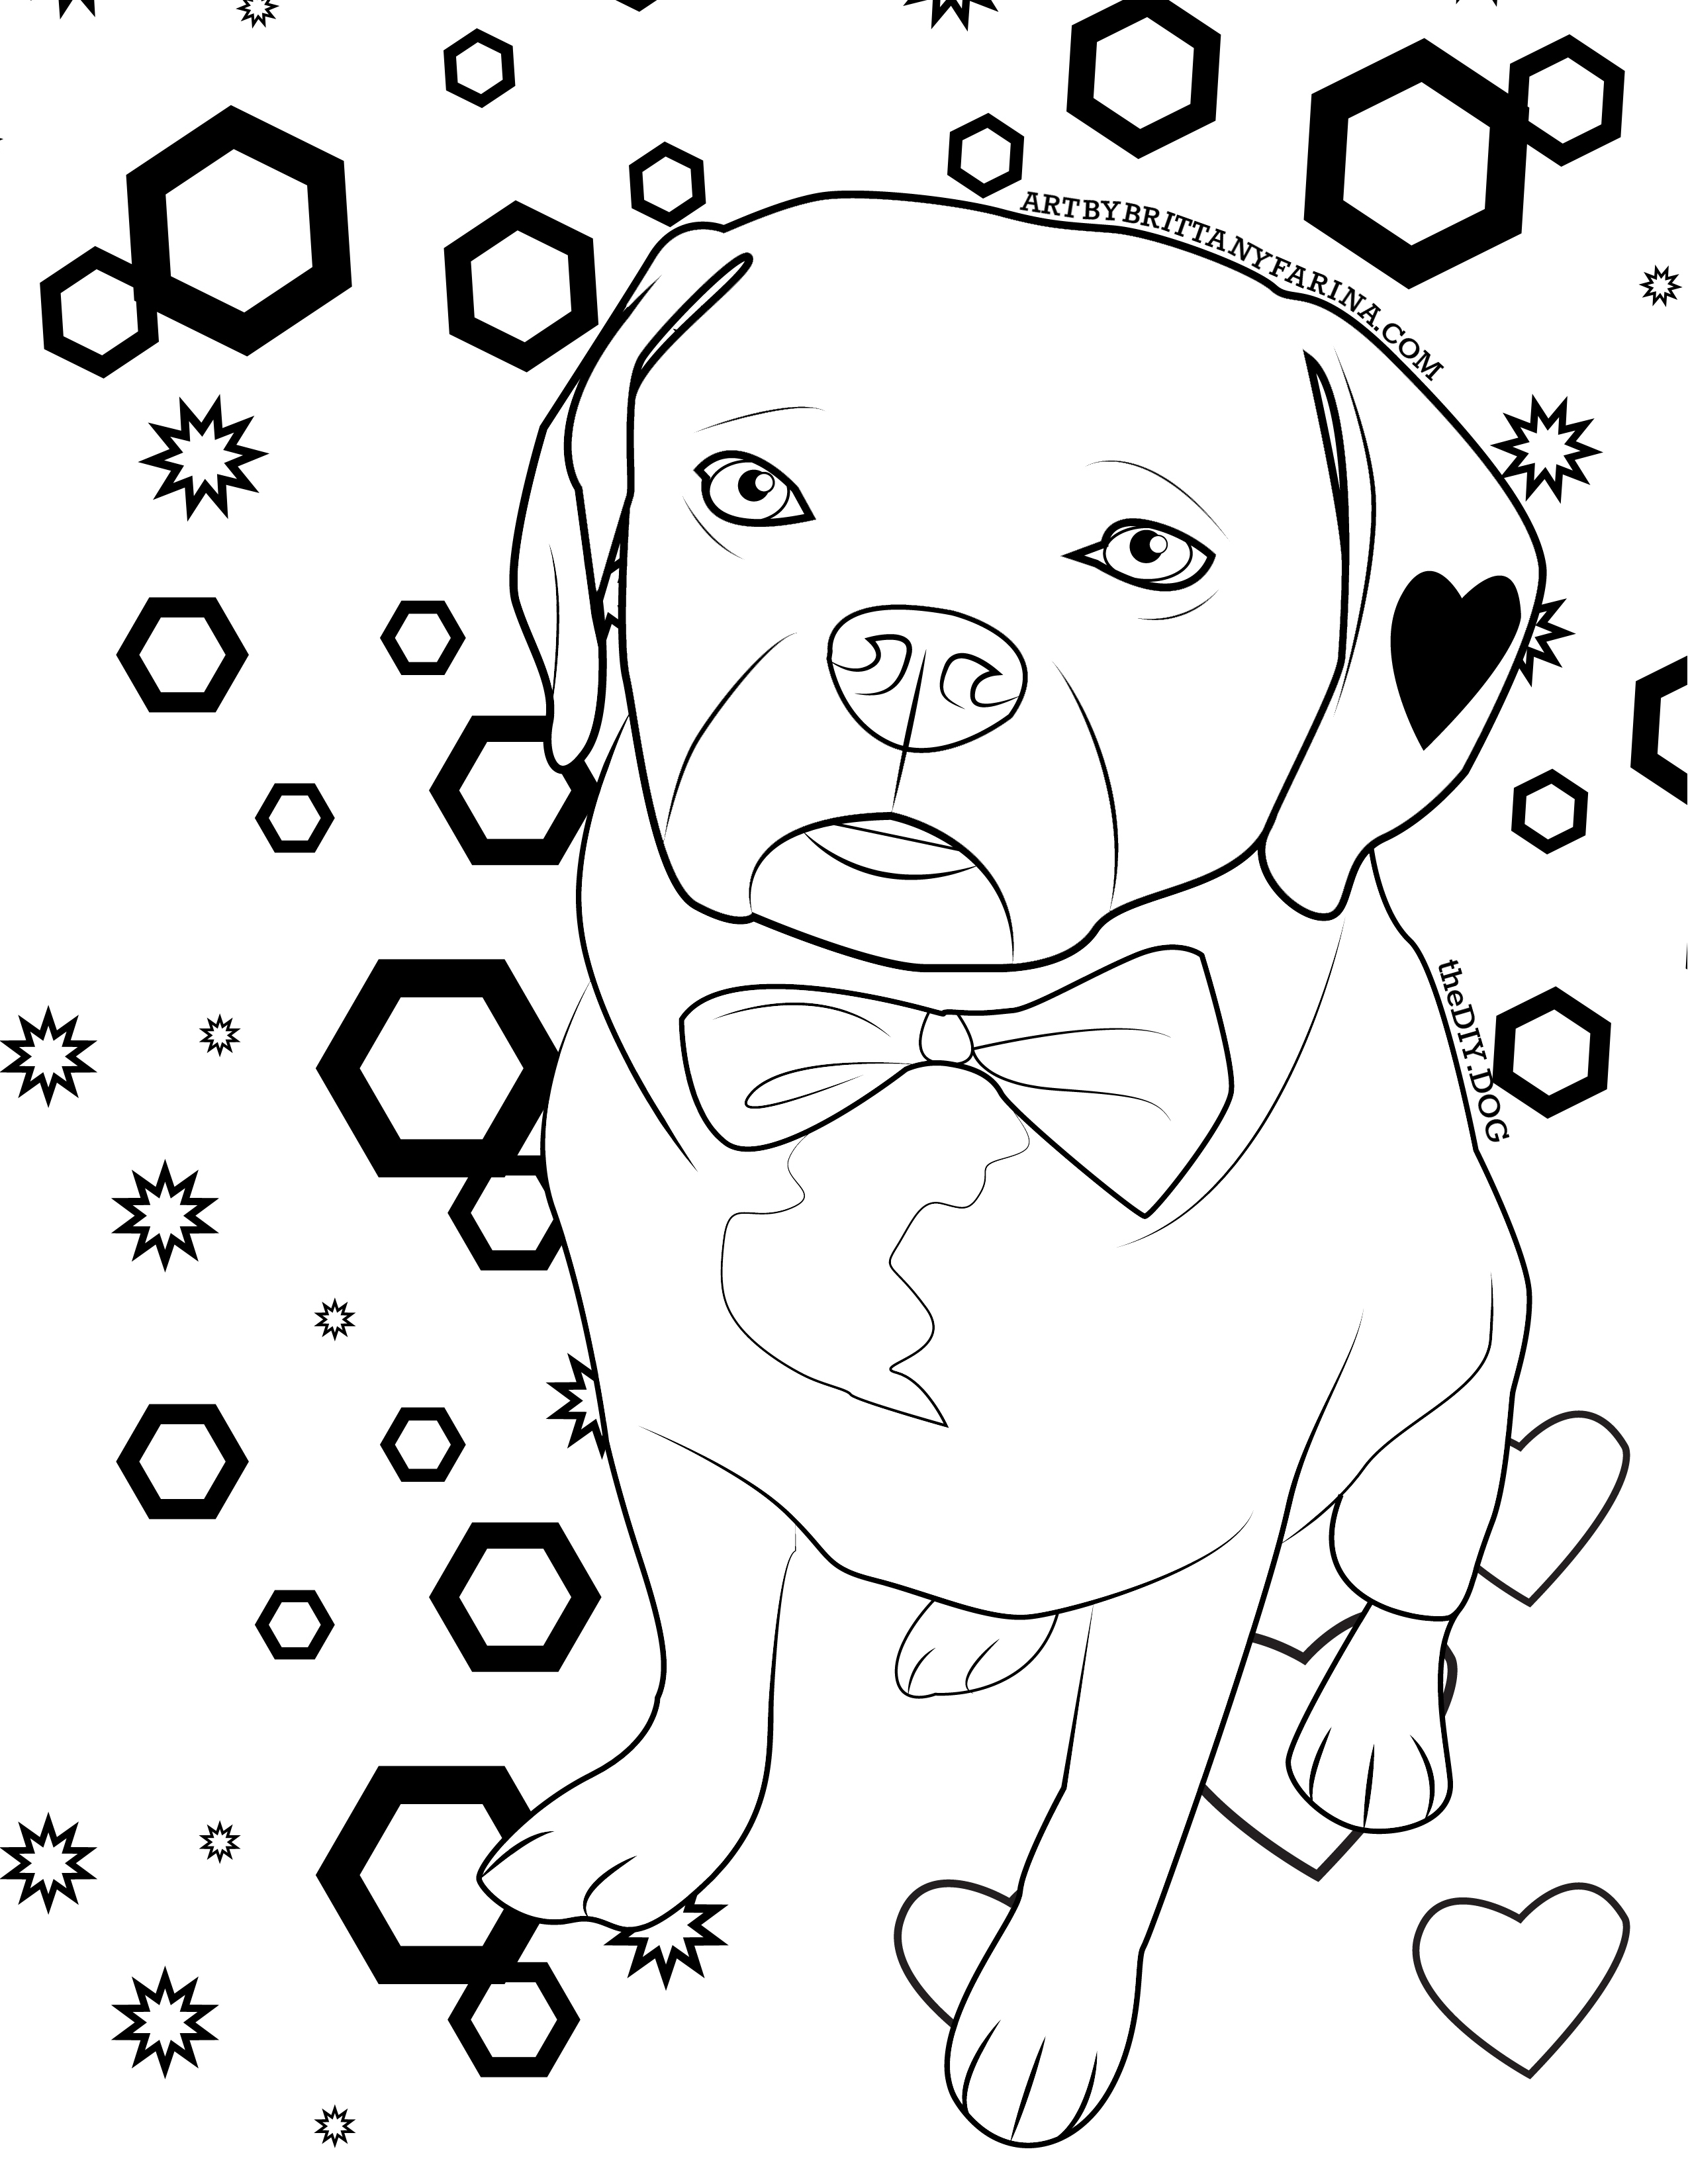 How to turn your dog into a coloring page